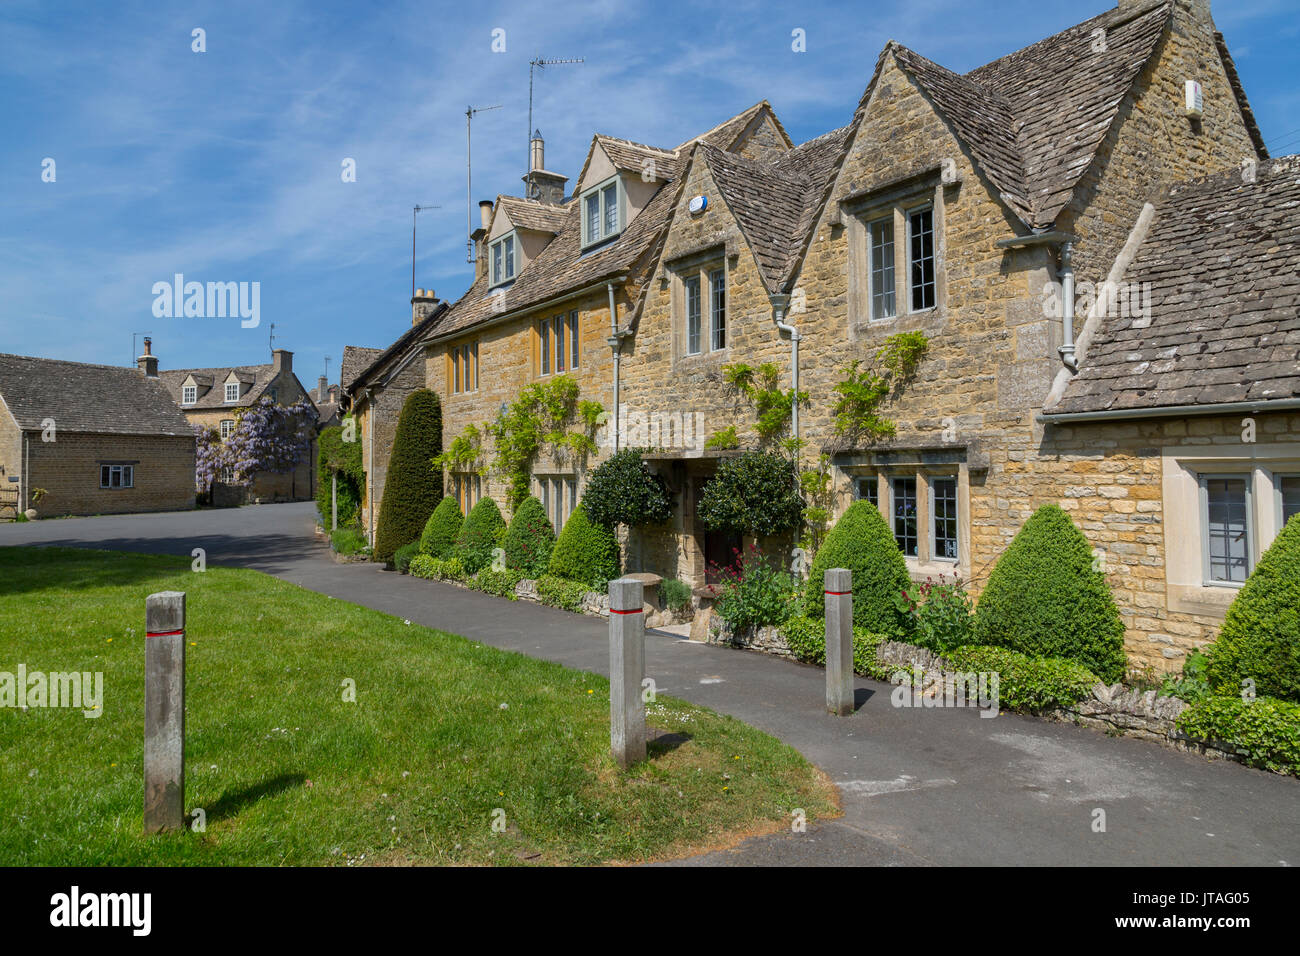 Cottages in Lower Slaughter, Cotswolds, Gloucestershire, England, Regno Unito, Europa Foto Stock